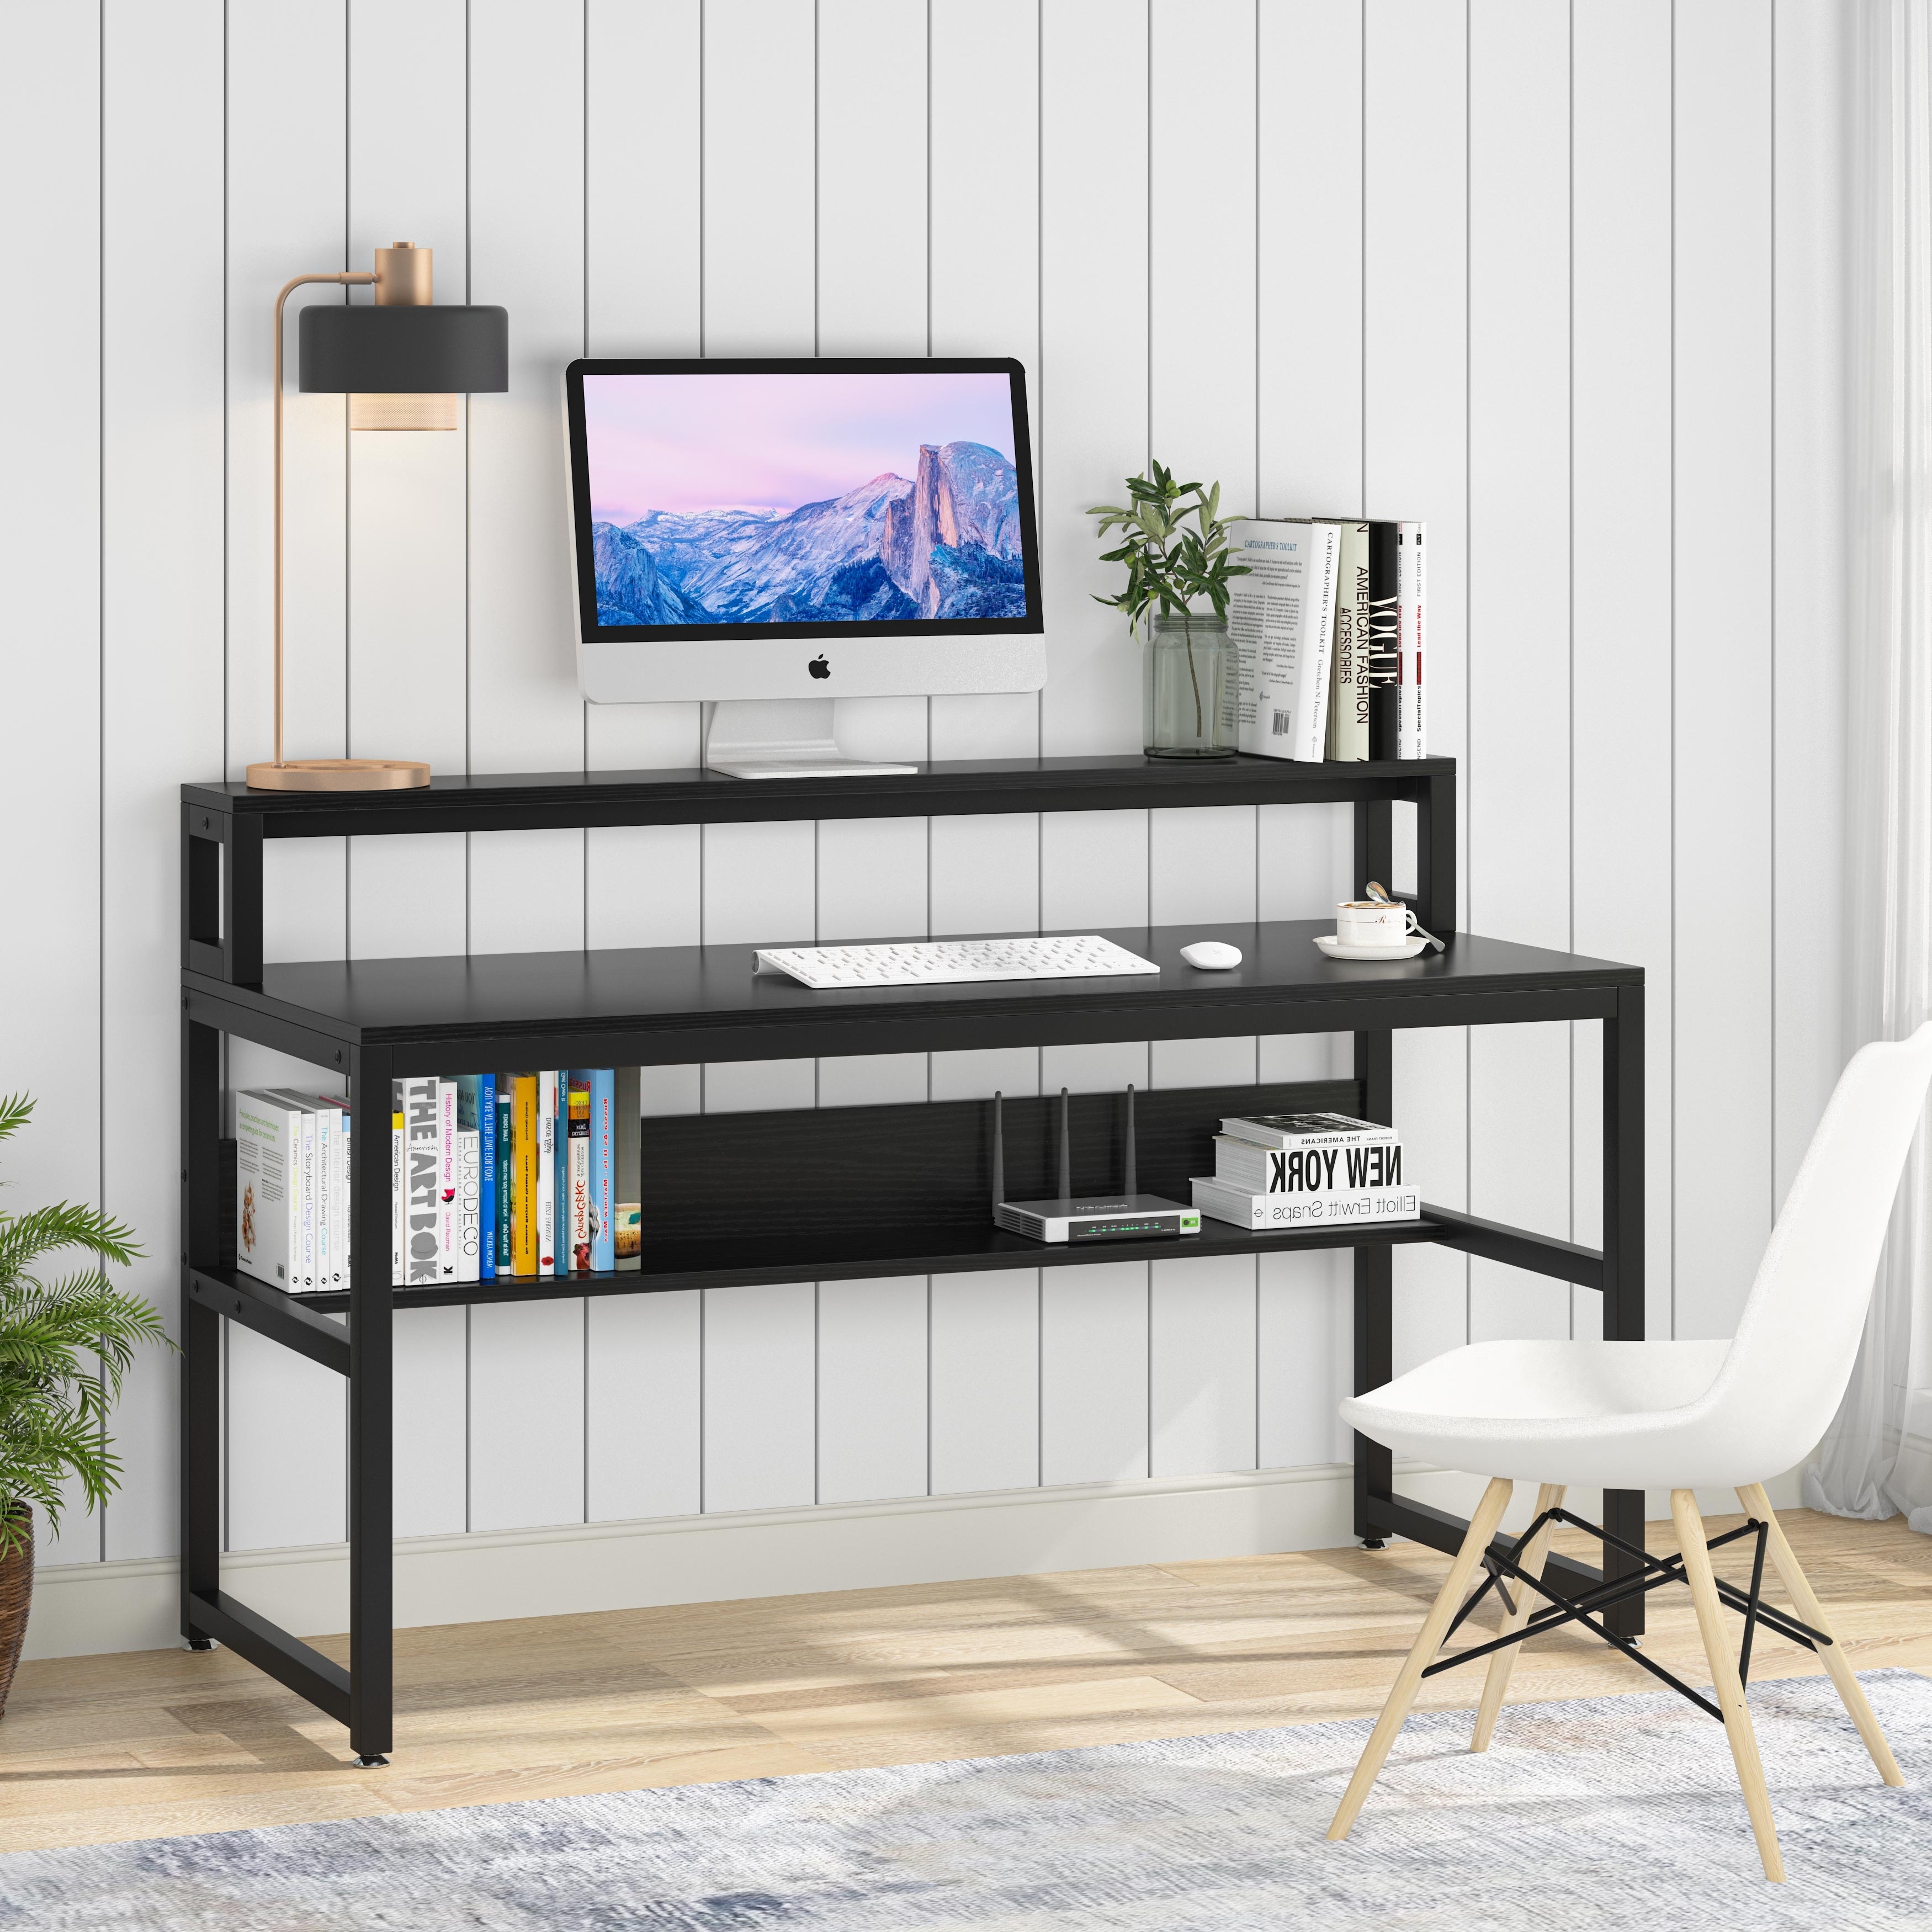 https://ak1.ostkcdn.com/images/products/is/images/direct/8a89a6c62ee8f0b5e997236e45bdb53b96e080c7/55%22-Computer-Desk-with-Shelves-and-Monitor-Stand.jpg